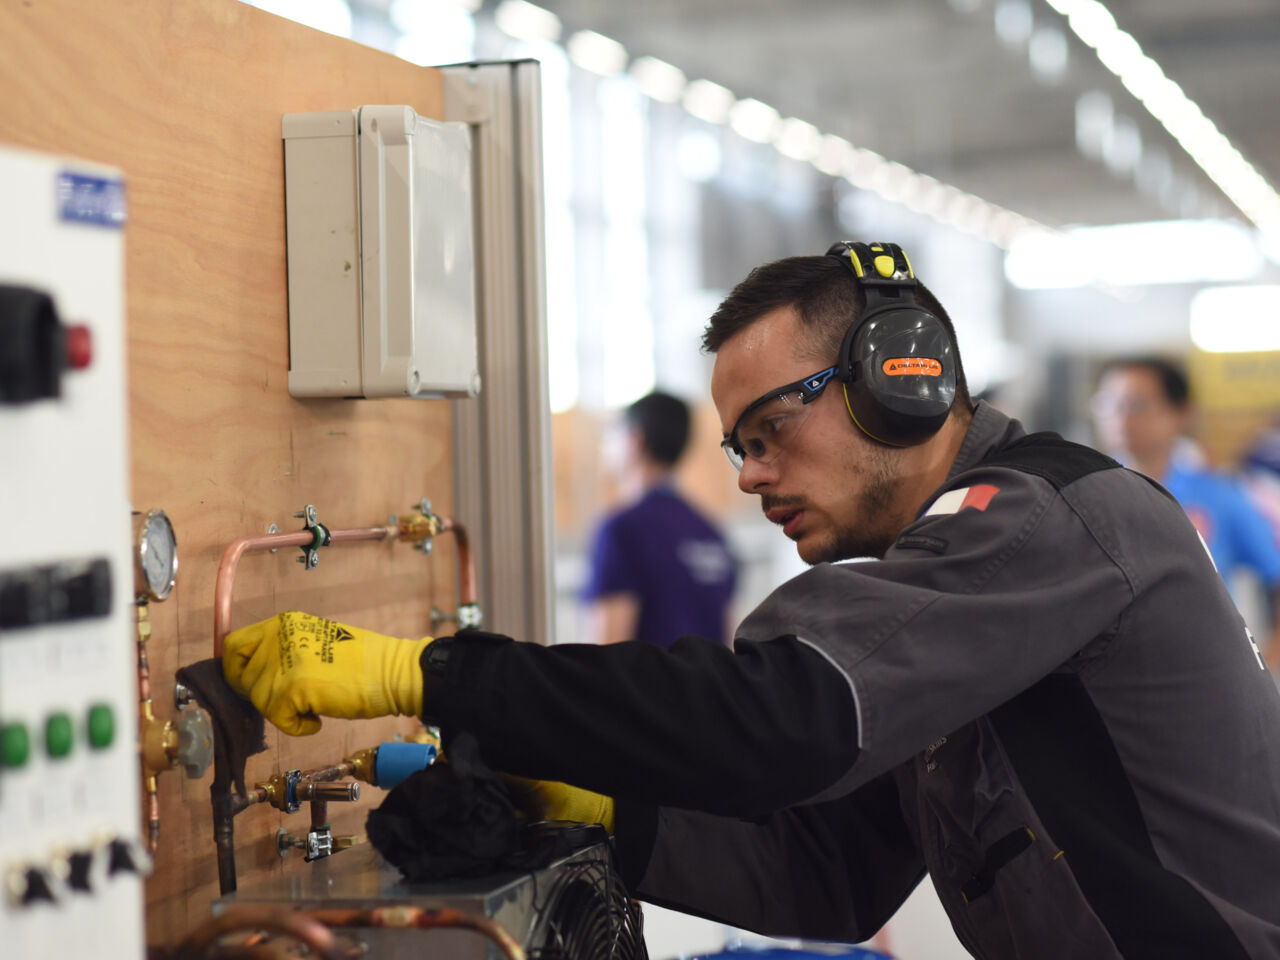 WorldSkills Champion Thomas Joubert, who won a Medallion for Excellence in Refrigeration and Air Conditioning at WorldSkills Kazan 2019.